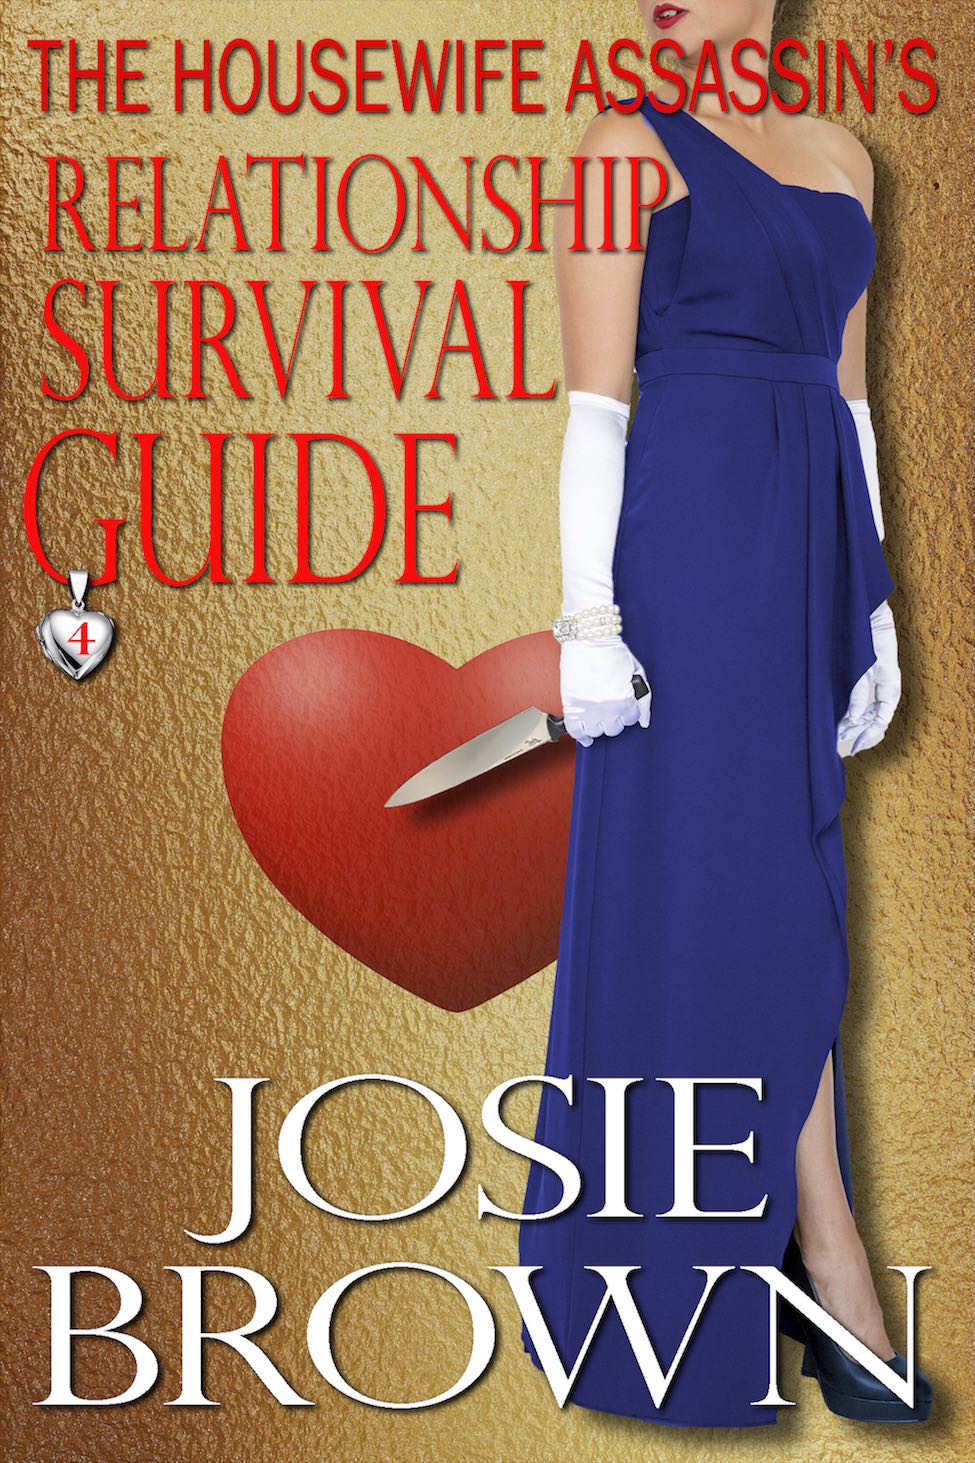 The Housewife Assassin's Relationship Survival Guide by Josie Brown